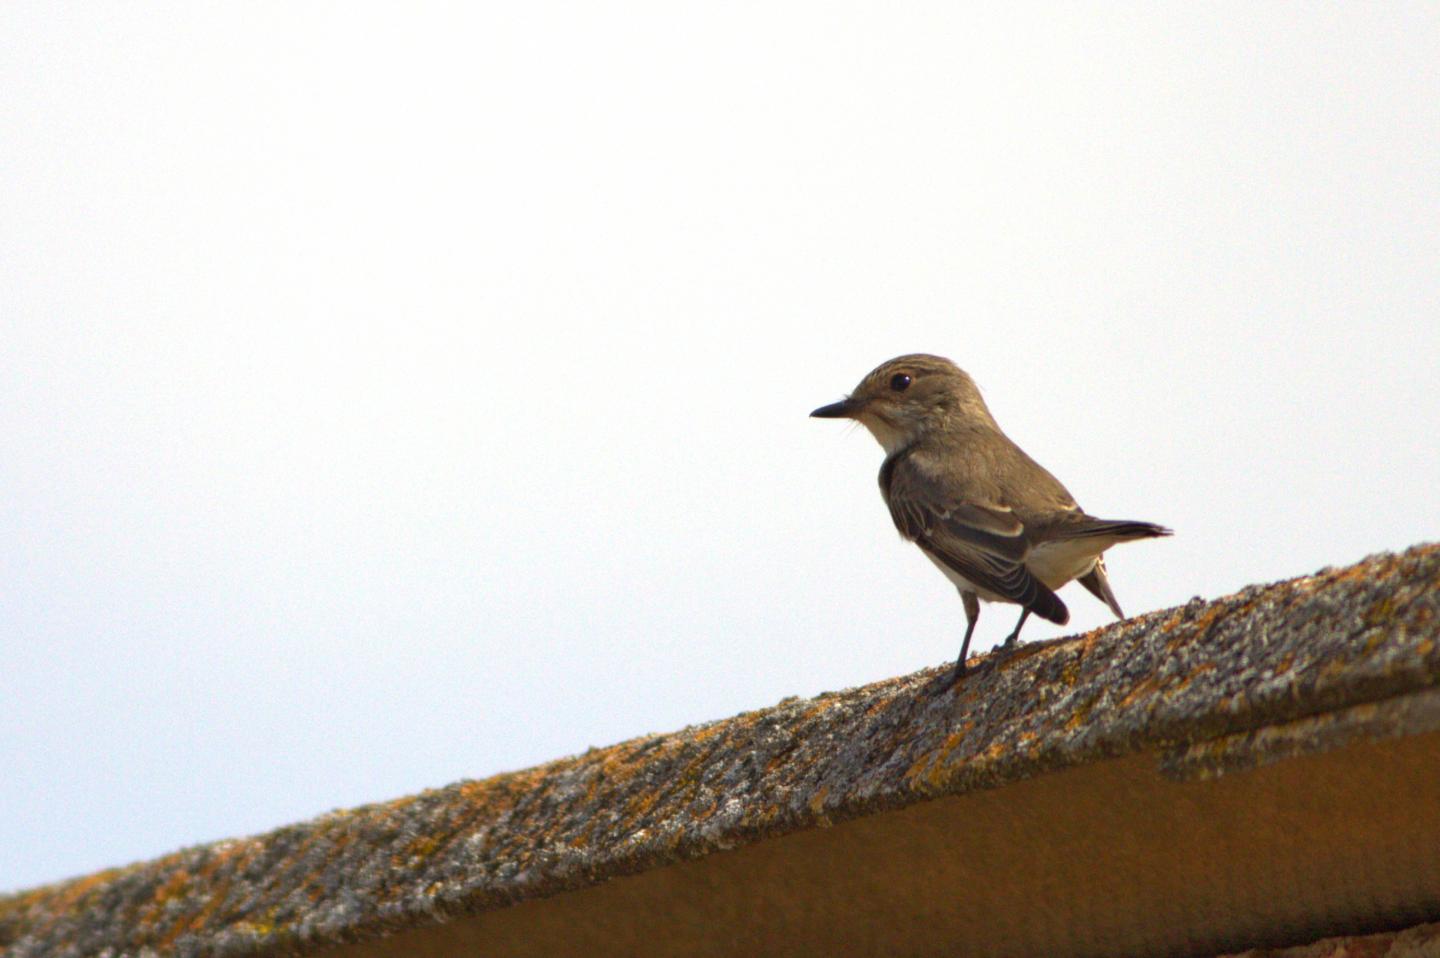 A Spotted Flycatcher (Muscicapa striata) in Spain presumably having a stopover for some food and rest.